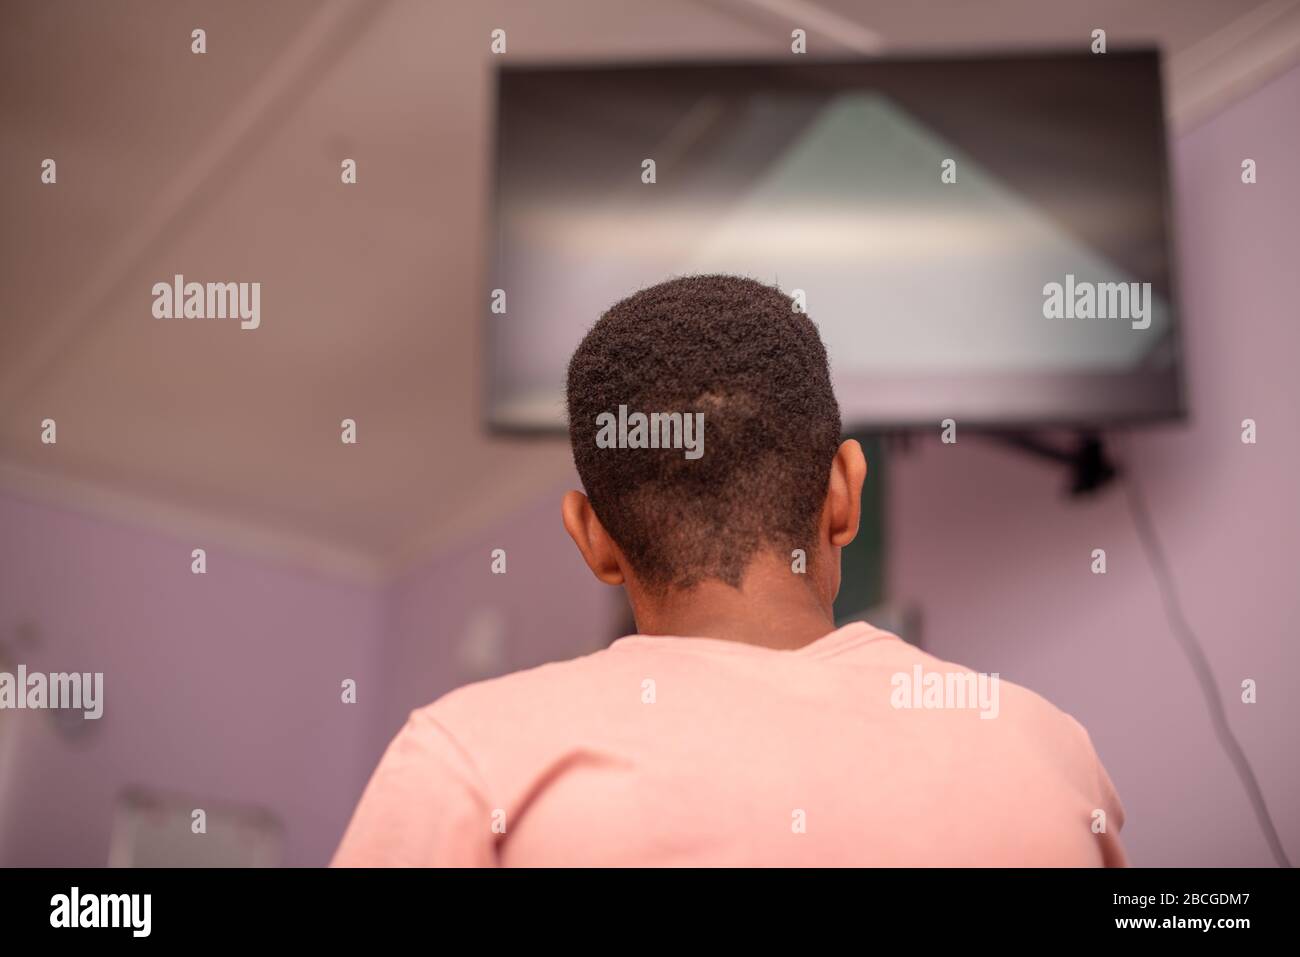 Young boy shot from behind while watching television Stock Photo